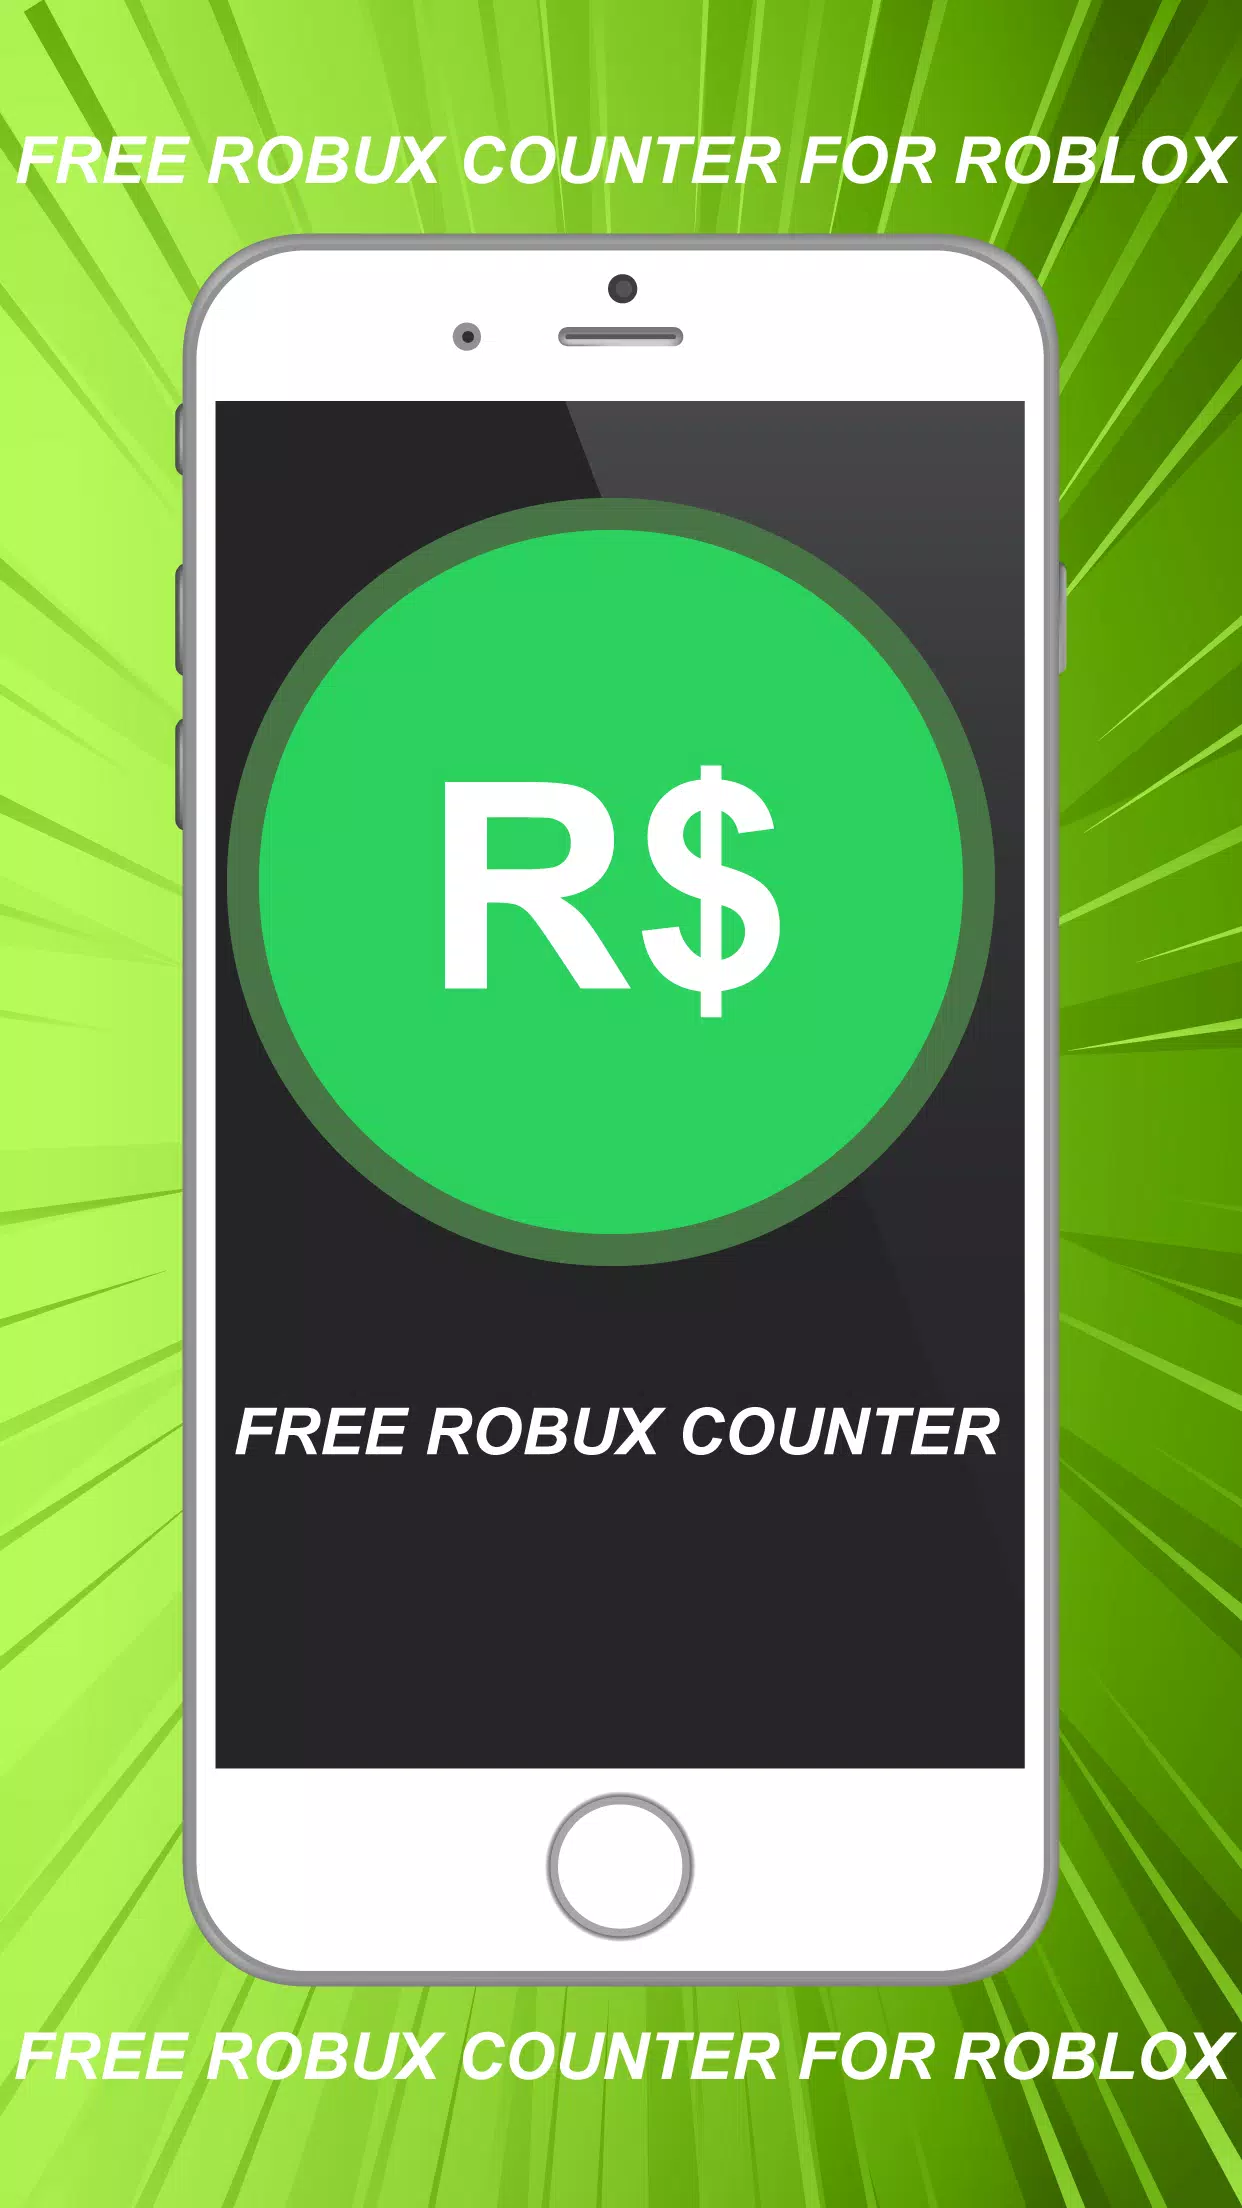 Robux counter & RBX Calc – Apps on Google Play